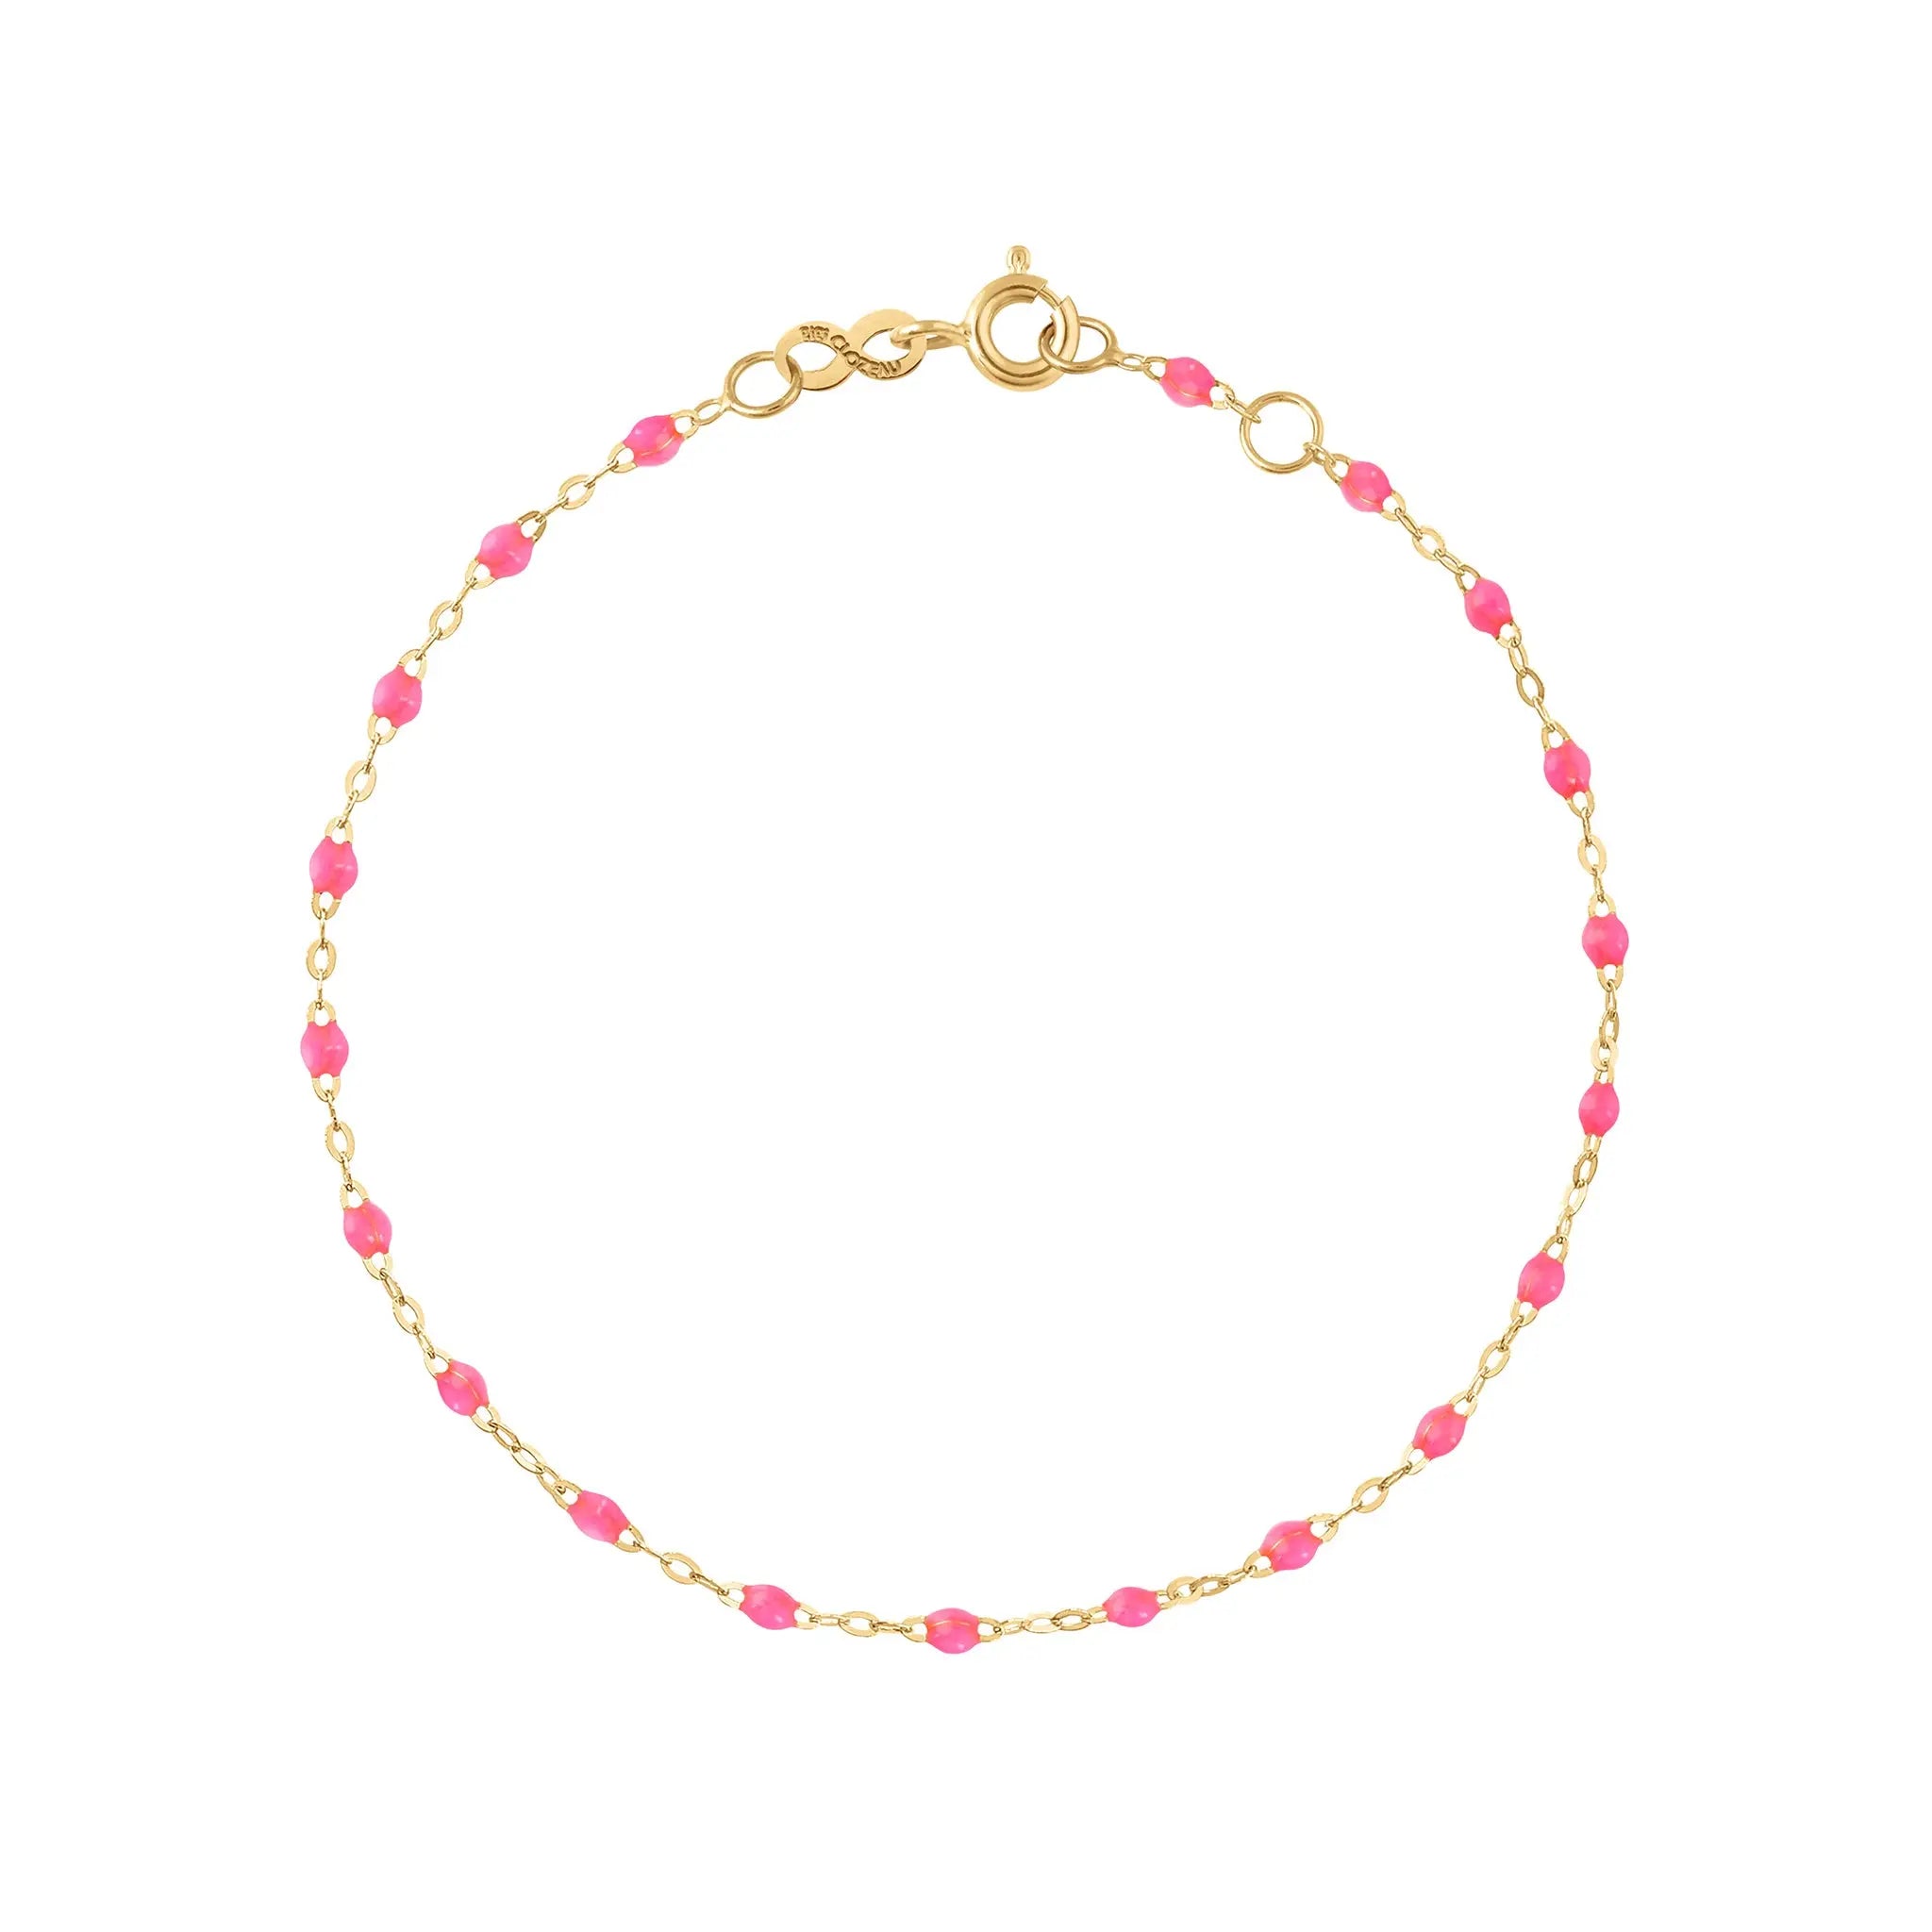 The Classic Gigi bracelet by gigi CLOZEAU features 18K Yellow Gold, and unique Pink jewels for a simple, everyday look.   Each jewel is unique, artisanally made in their family-owned workshop. 18K yellow gold and resin. The bracelet measures 6.7 inches with adjustable clasp at 6.3 inches.